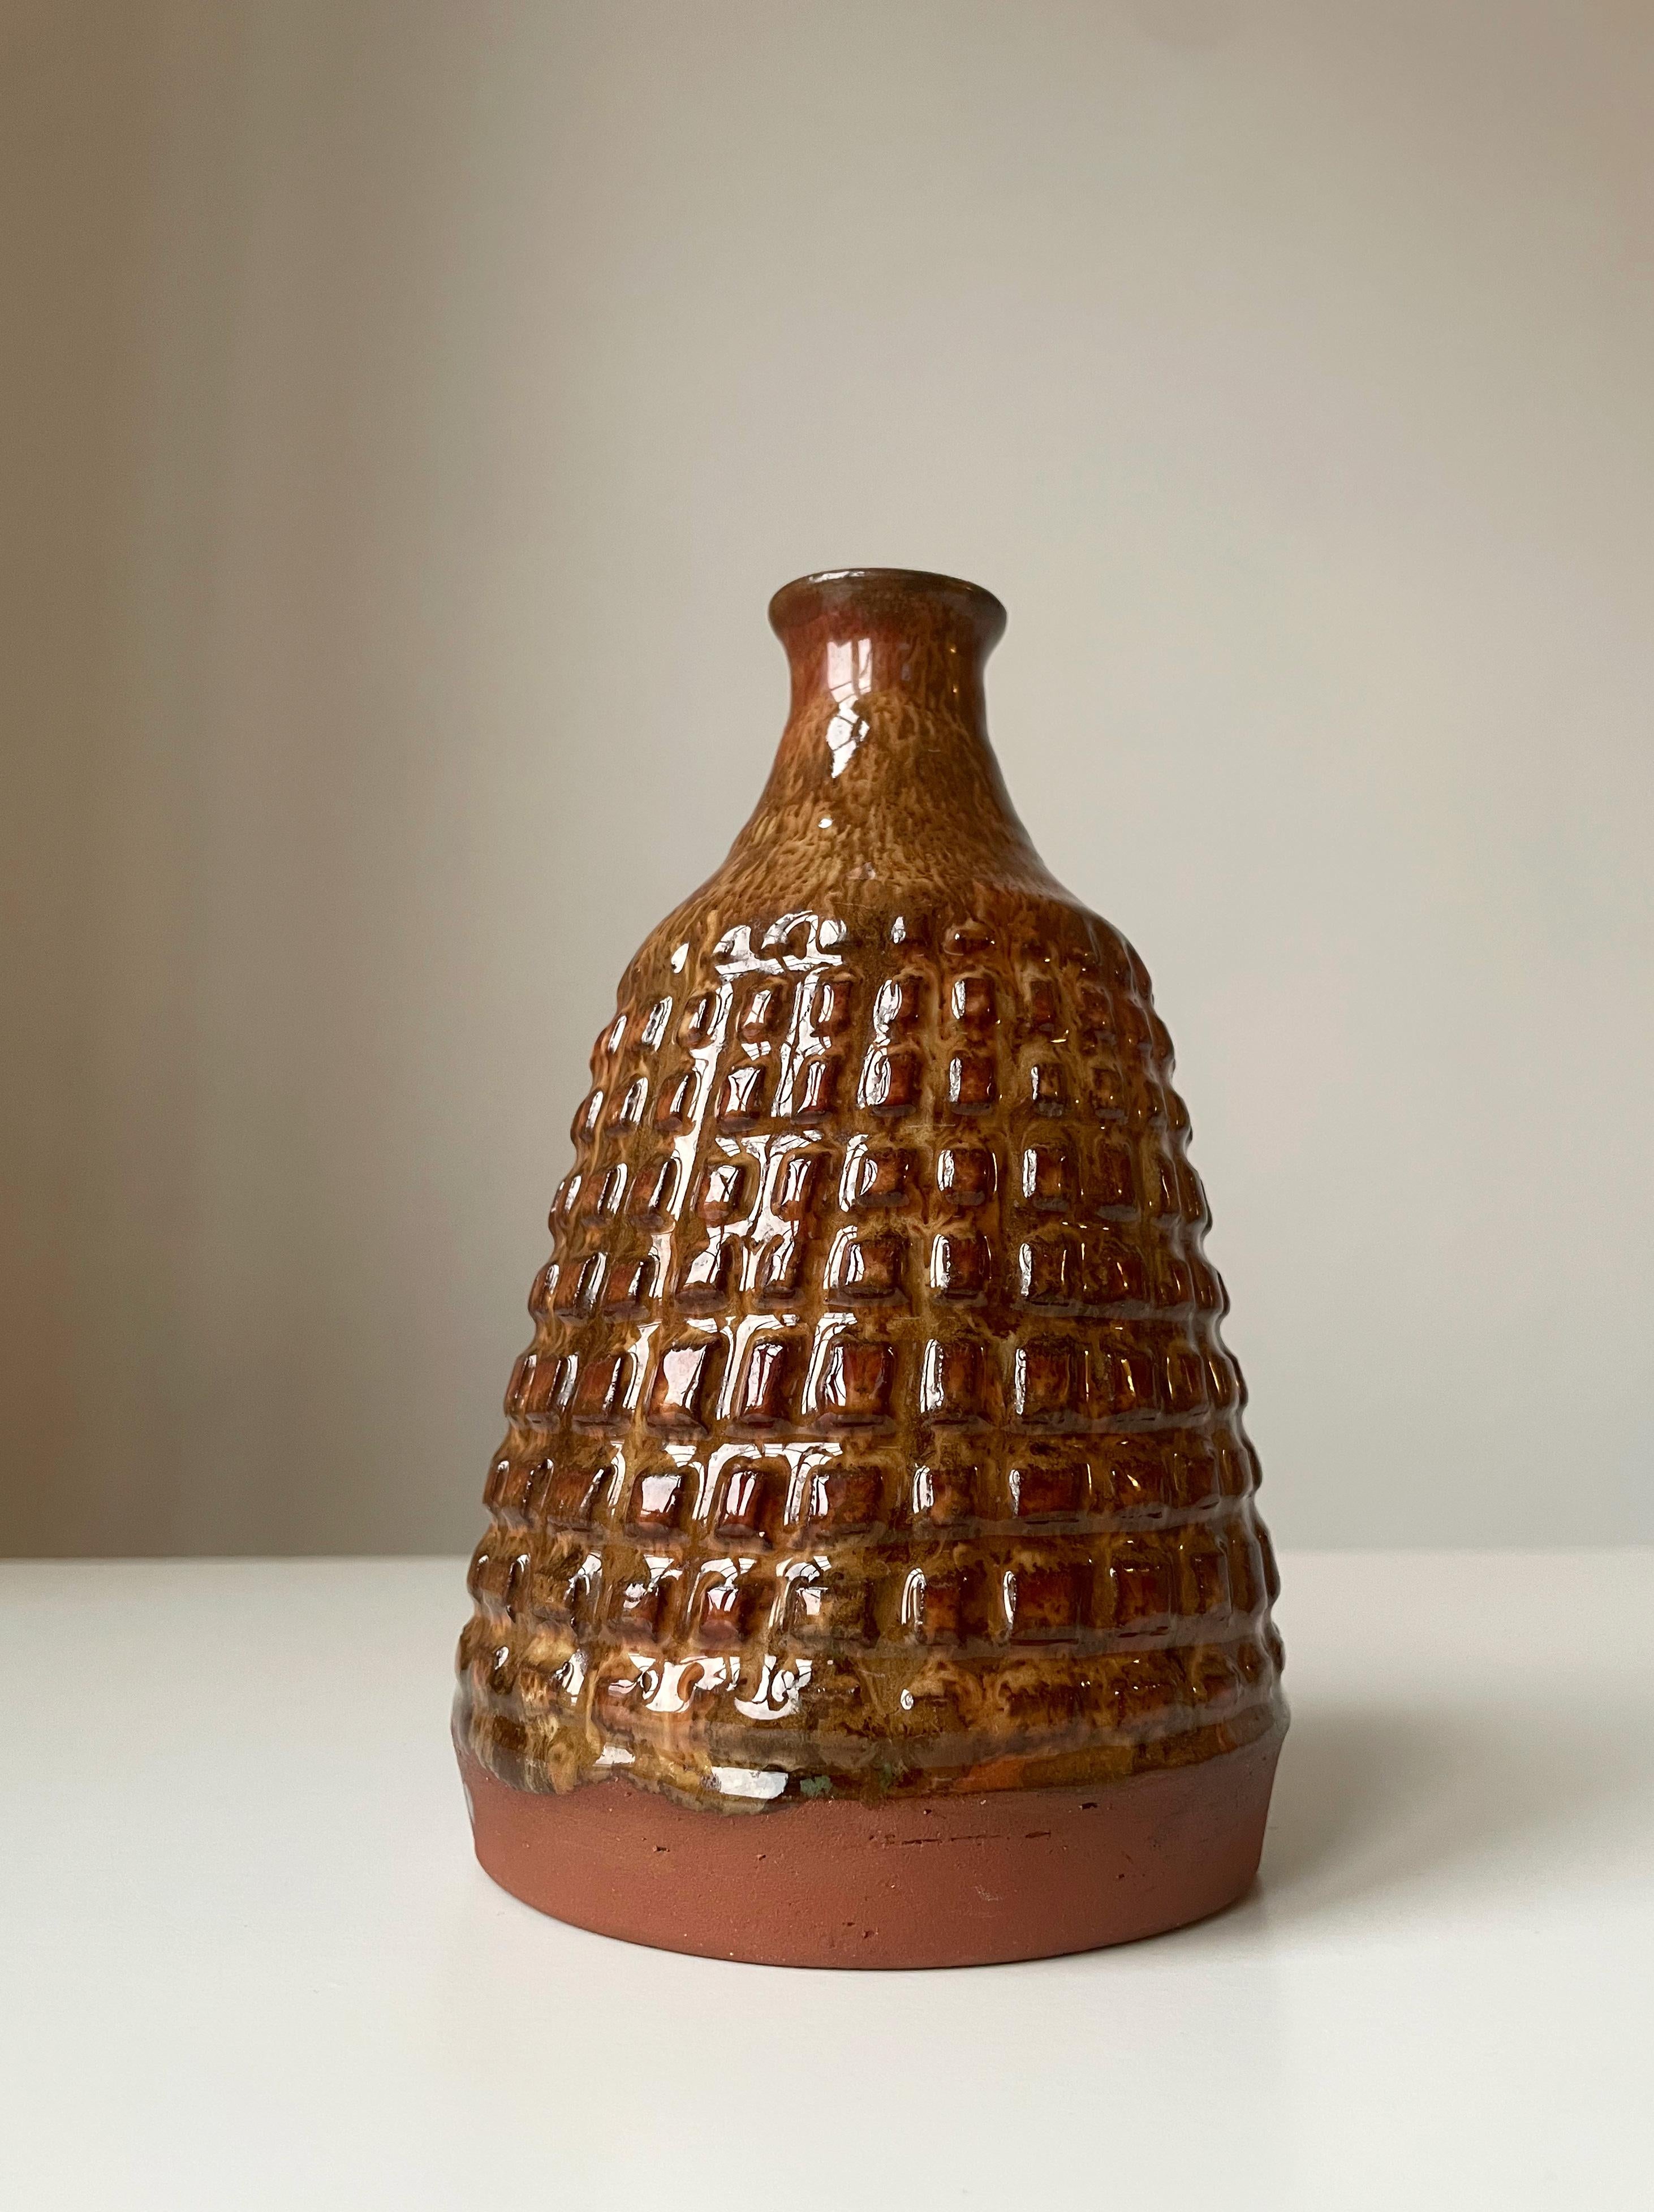 Heavy Danish midcentury modern handmade cone shaped stoneware vase with umber, caramel and hickory brown colored running glaze over square shaped relief stud decorations in an organic pattern around the belly. Slim neck and raw terracotta red clay